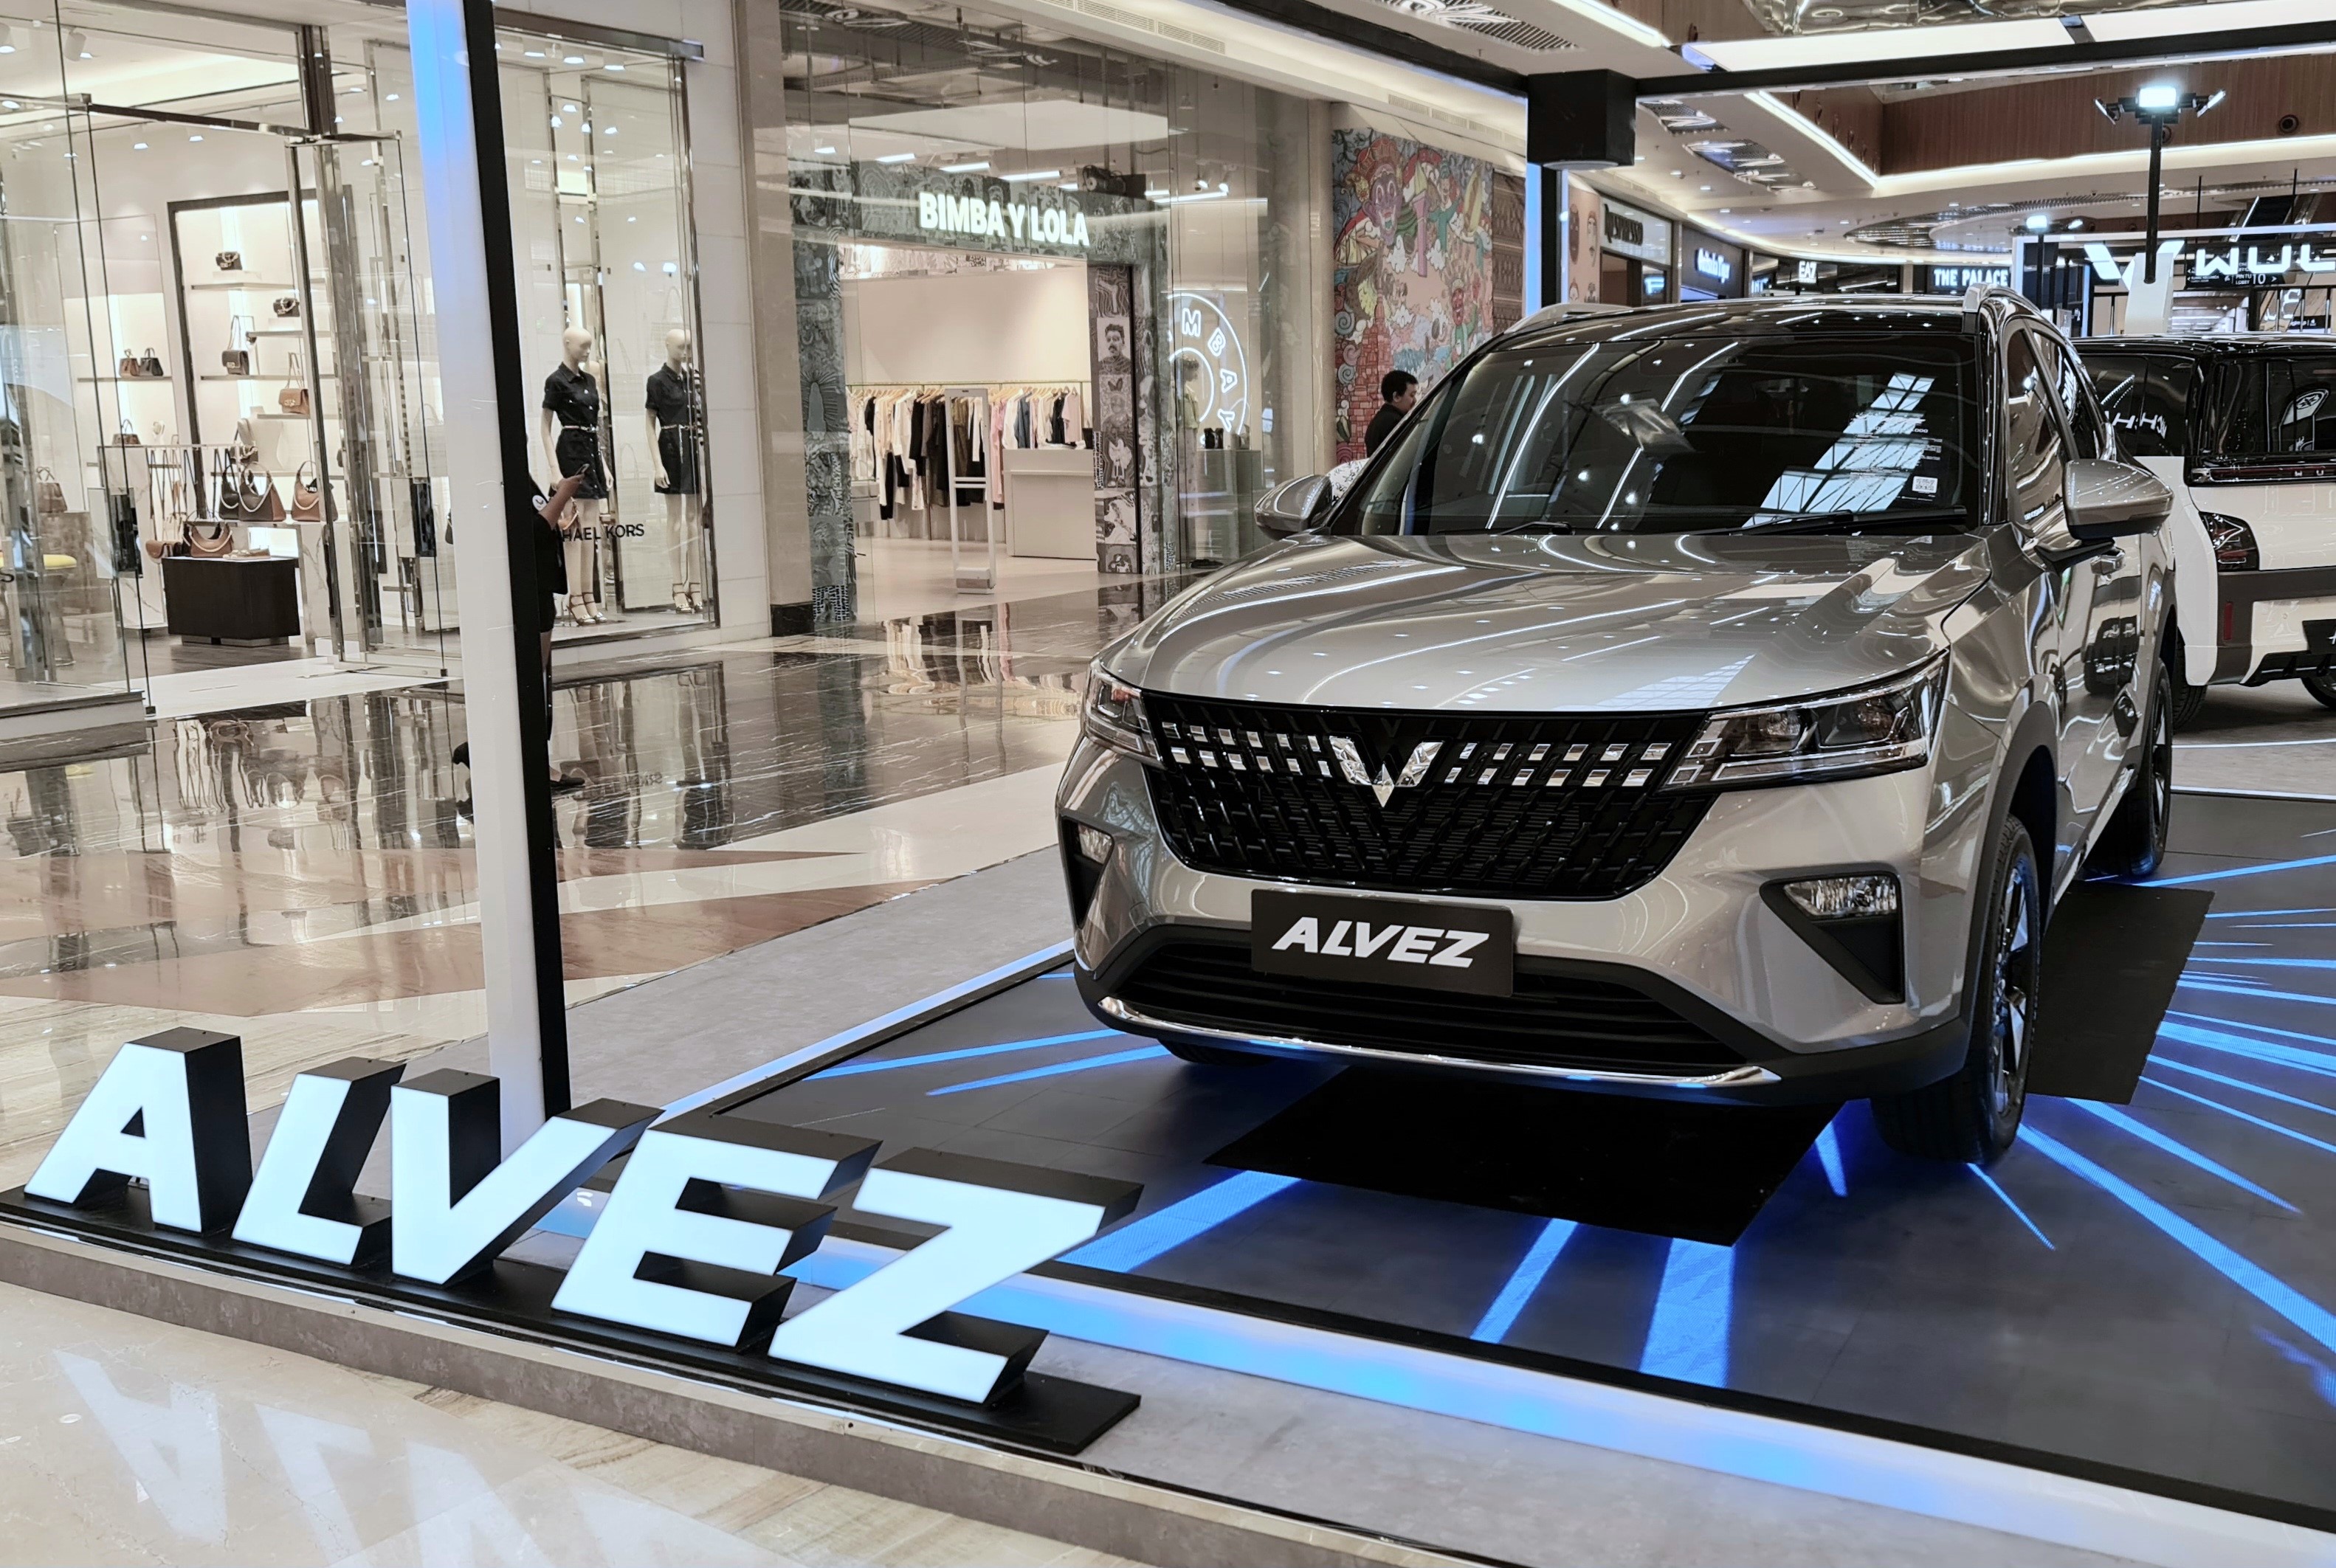 Image Wuling Holds Exhibition for Its Latest Compact SUV, Alvez, in Jakarta